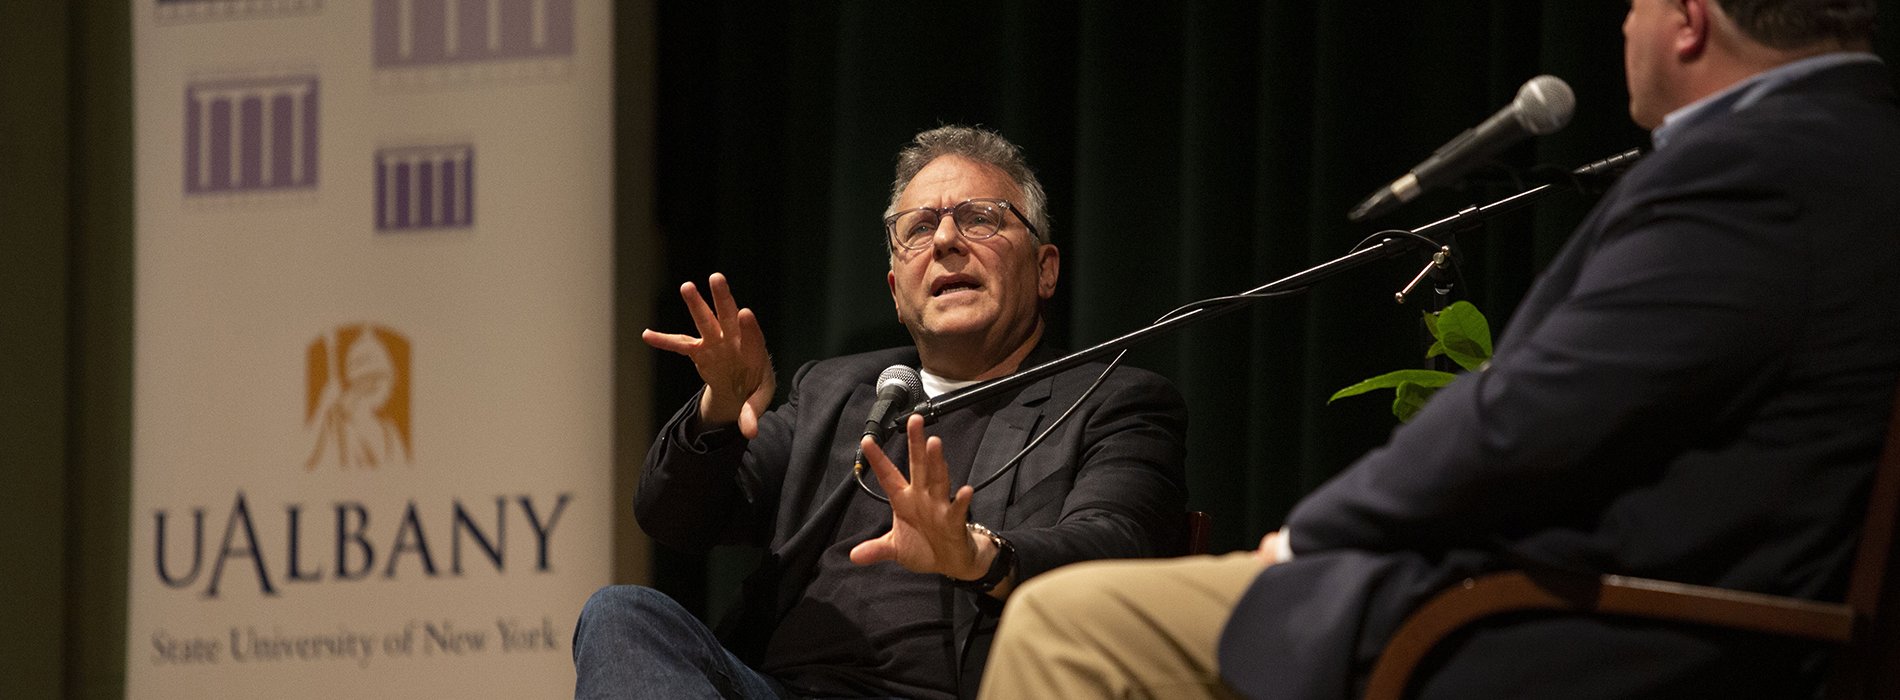 Paul Reiser in the Creative Life discussion event